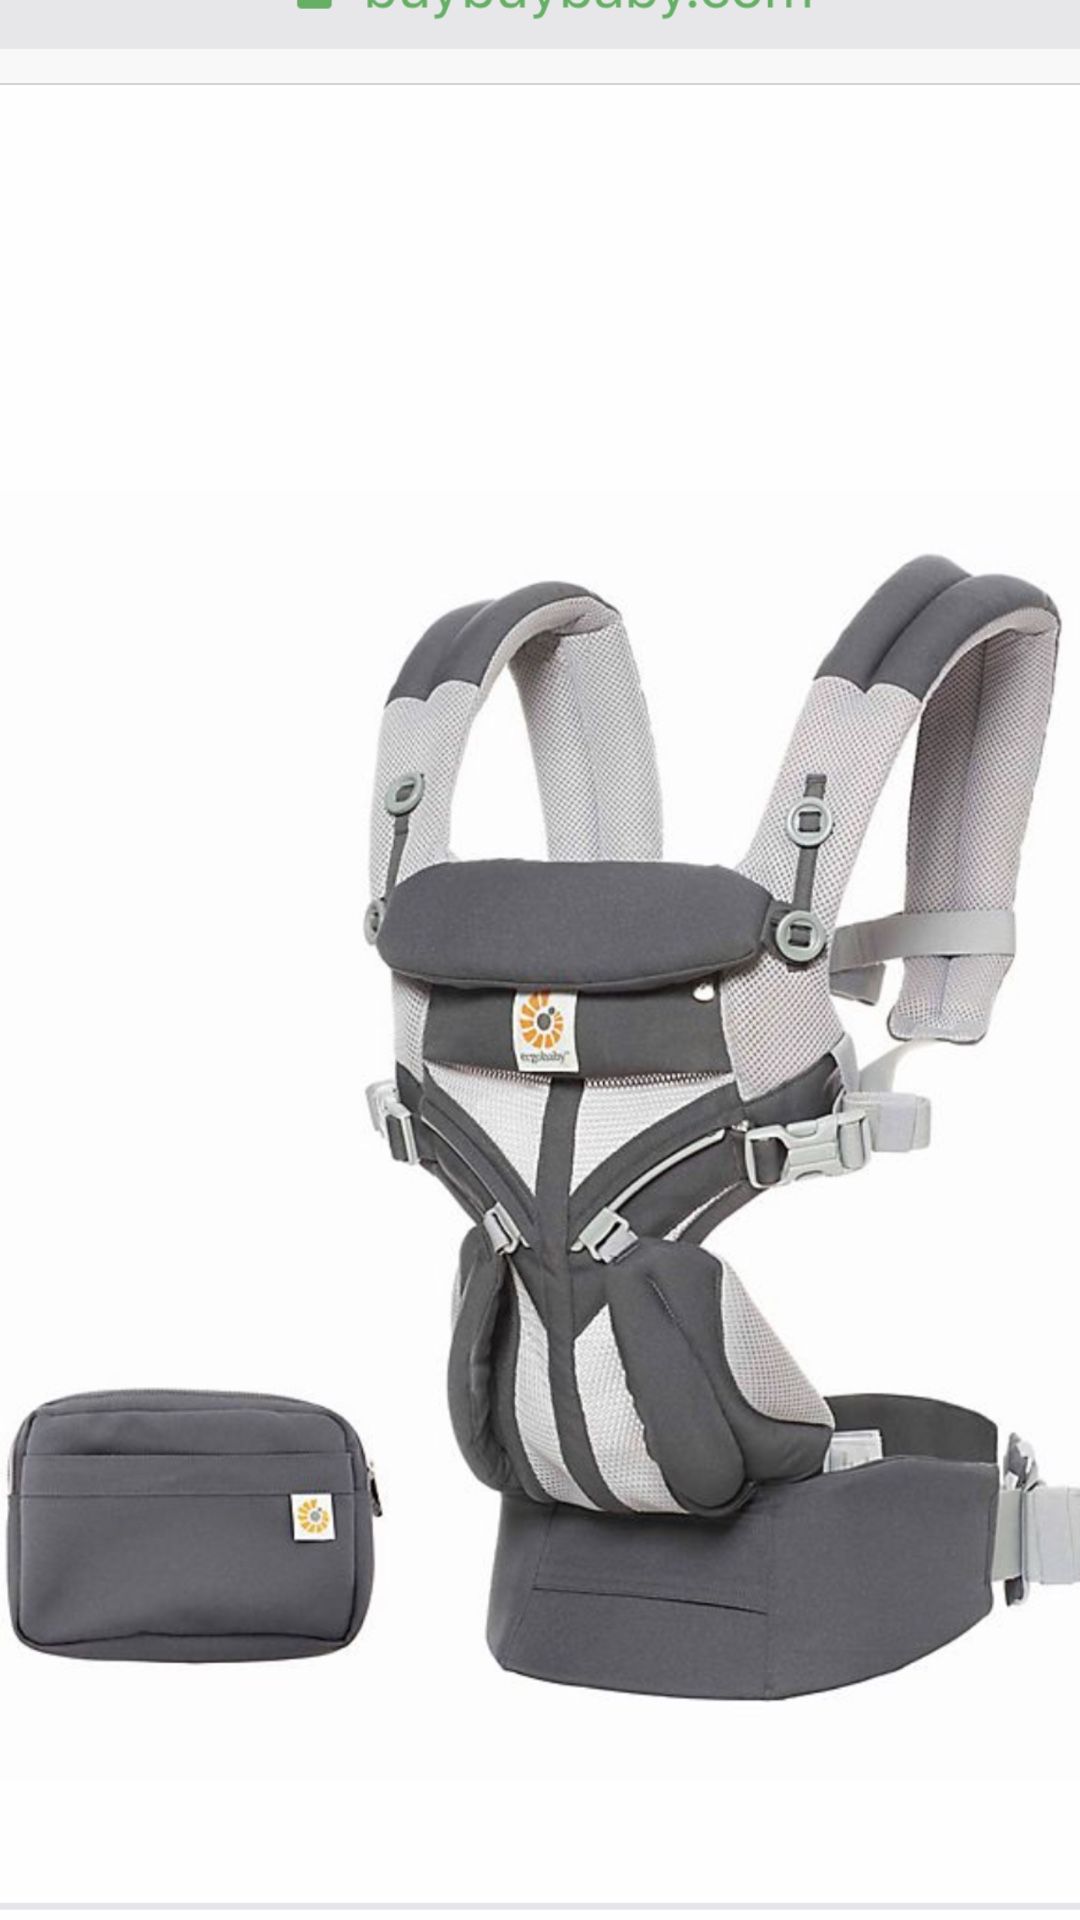 Ergobaby's Omni 360 Cool Air Mesh Baby Carrier